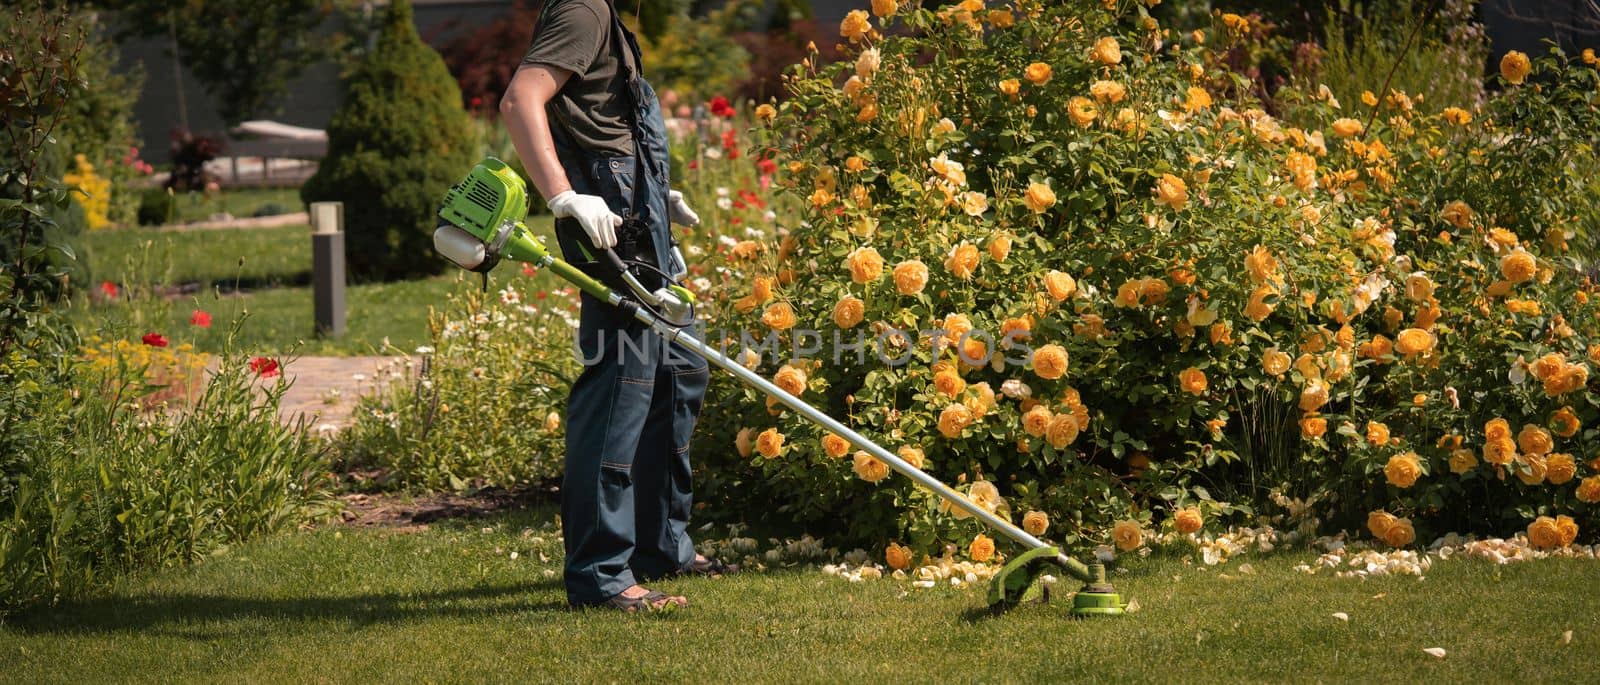 A young man is mowing a lawn with a lawn mower in his beautiful green floral summer garden. A man with a lawnmower cares for the grass in the backyard.A professional gardener is cutting the grass in gloves.